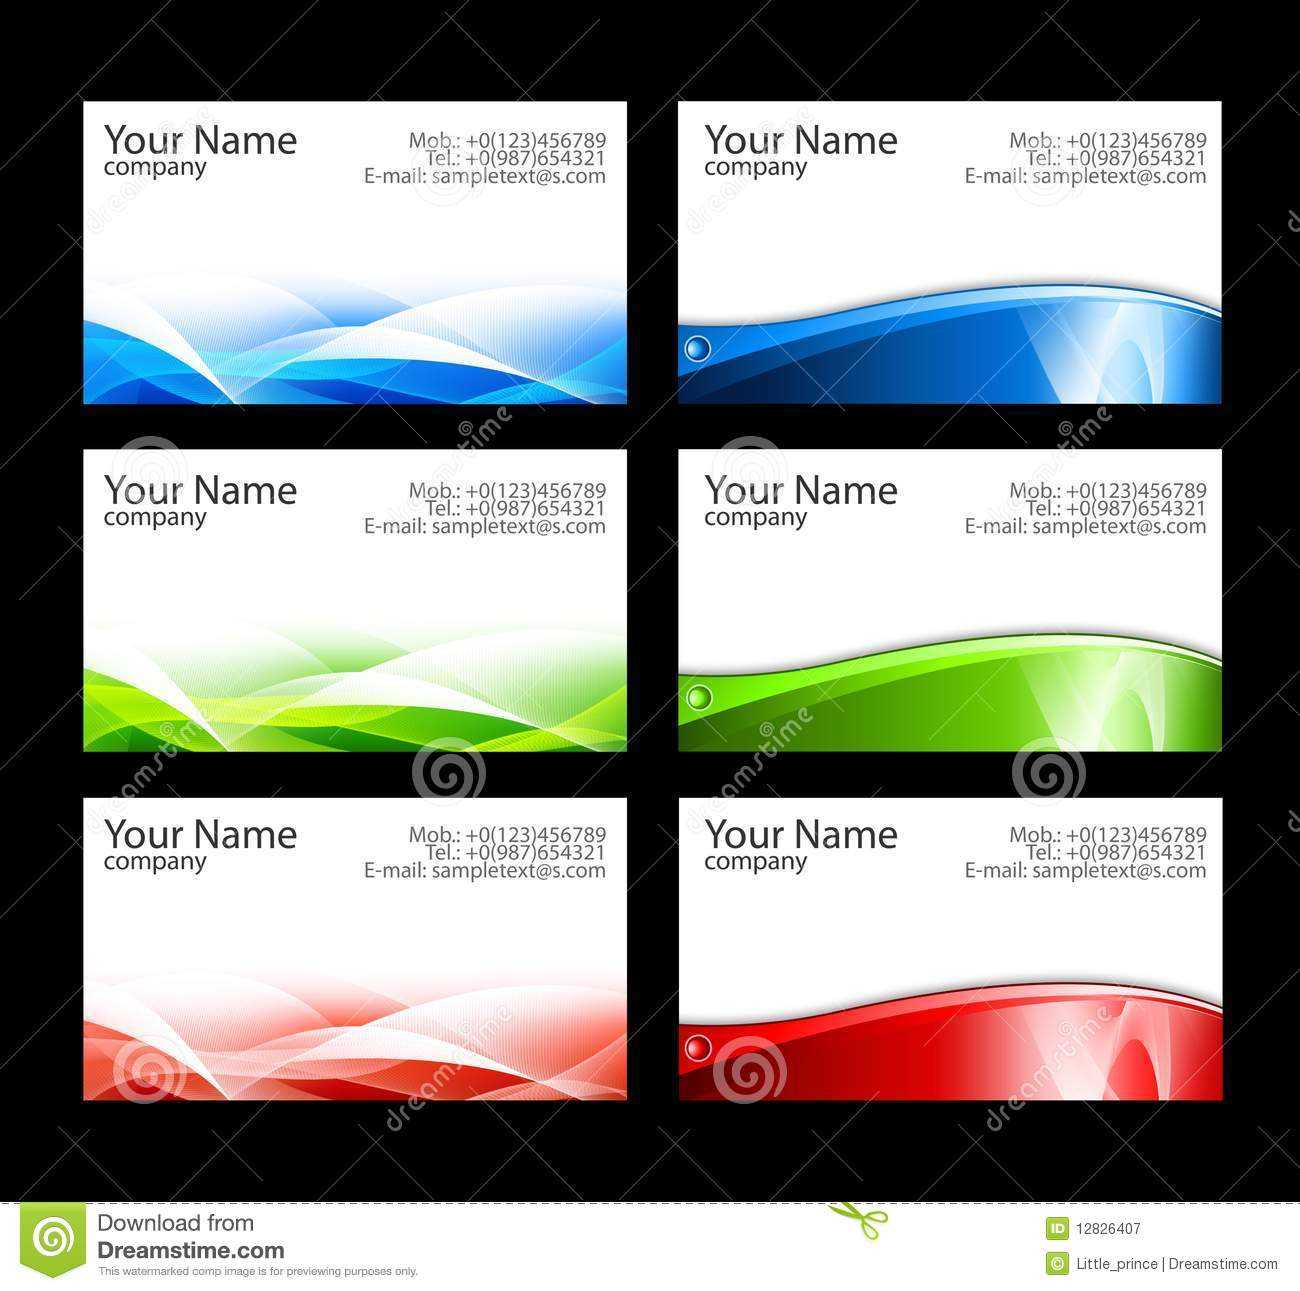 Business Cards Templates Stock Illustration. Illustration Of For Word Template For Business Cards Free